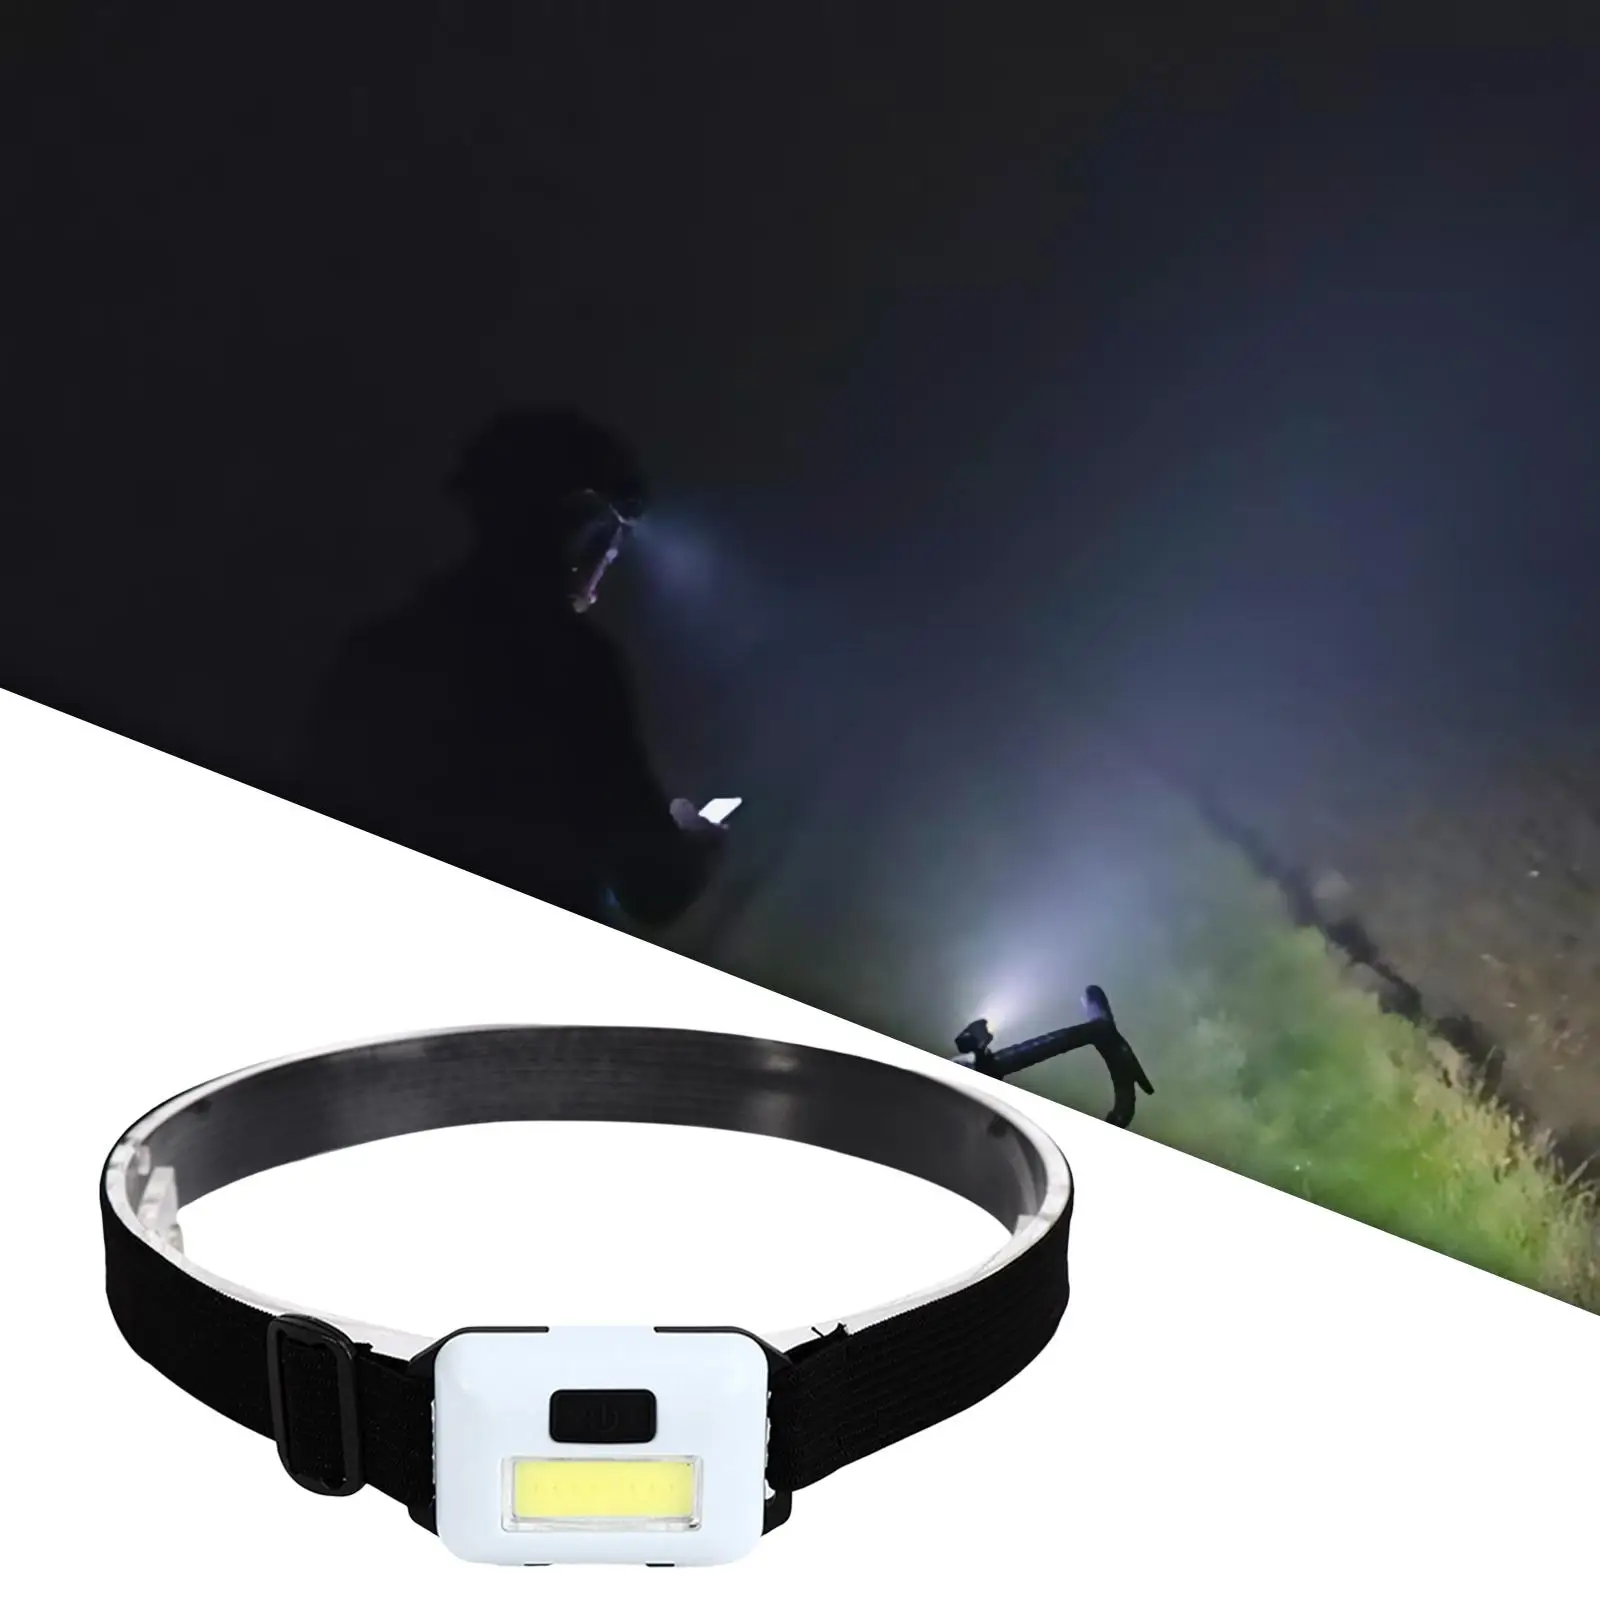 Small LED Headlamp flashlights Battery Powered Lightweight Elastic Head Band Light for Riding Repair Fishing Camping Adventure